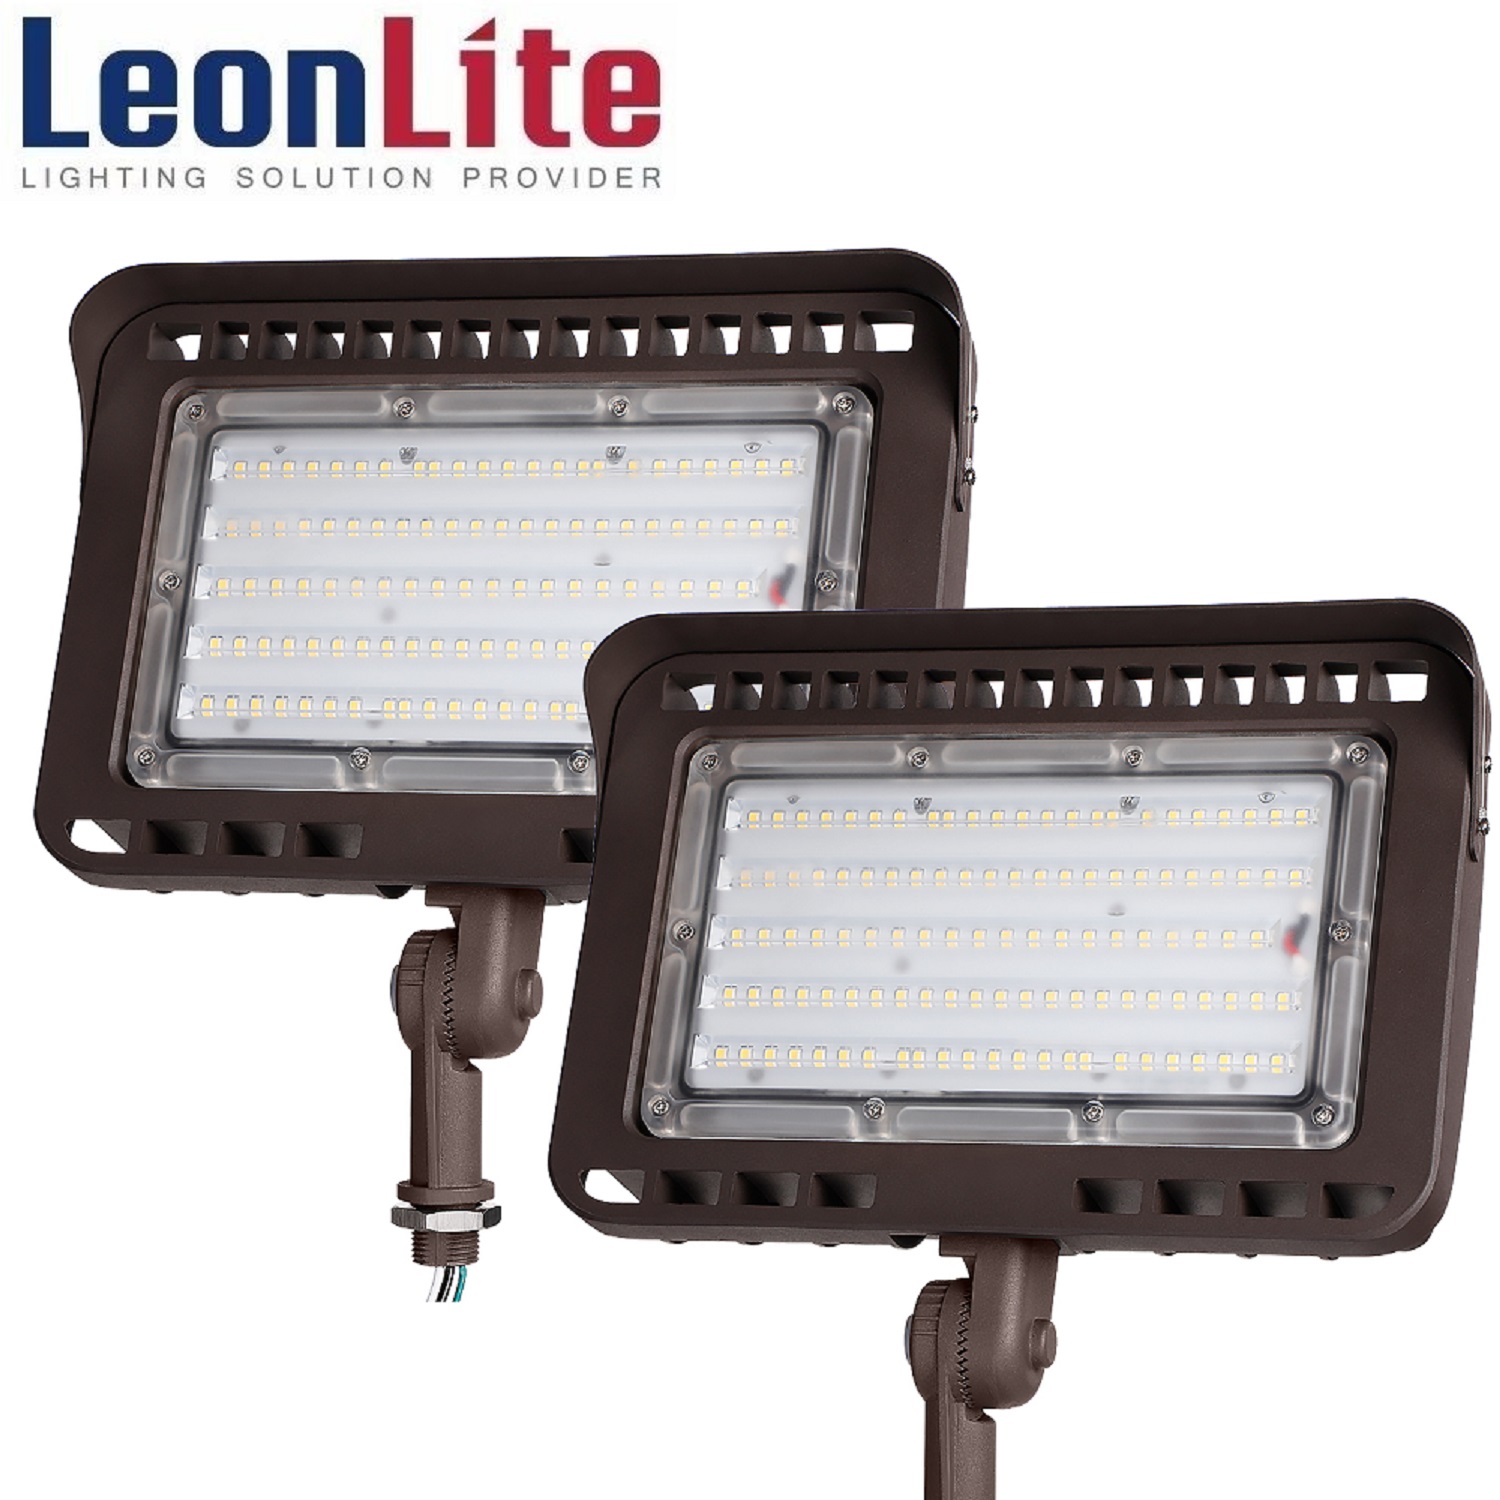 Leonlite 100W LED Outdoor Flood Light with Knuckle, 1000W Eqv, 11,000lm  Ultra Bright, ETL Listed CRI90+ Wall Washer Security Light, IP65  Waterproof, 3000K Warm White, for Yard, Parking Lot, Pack of